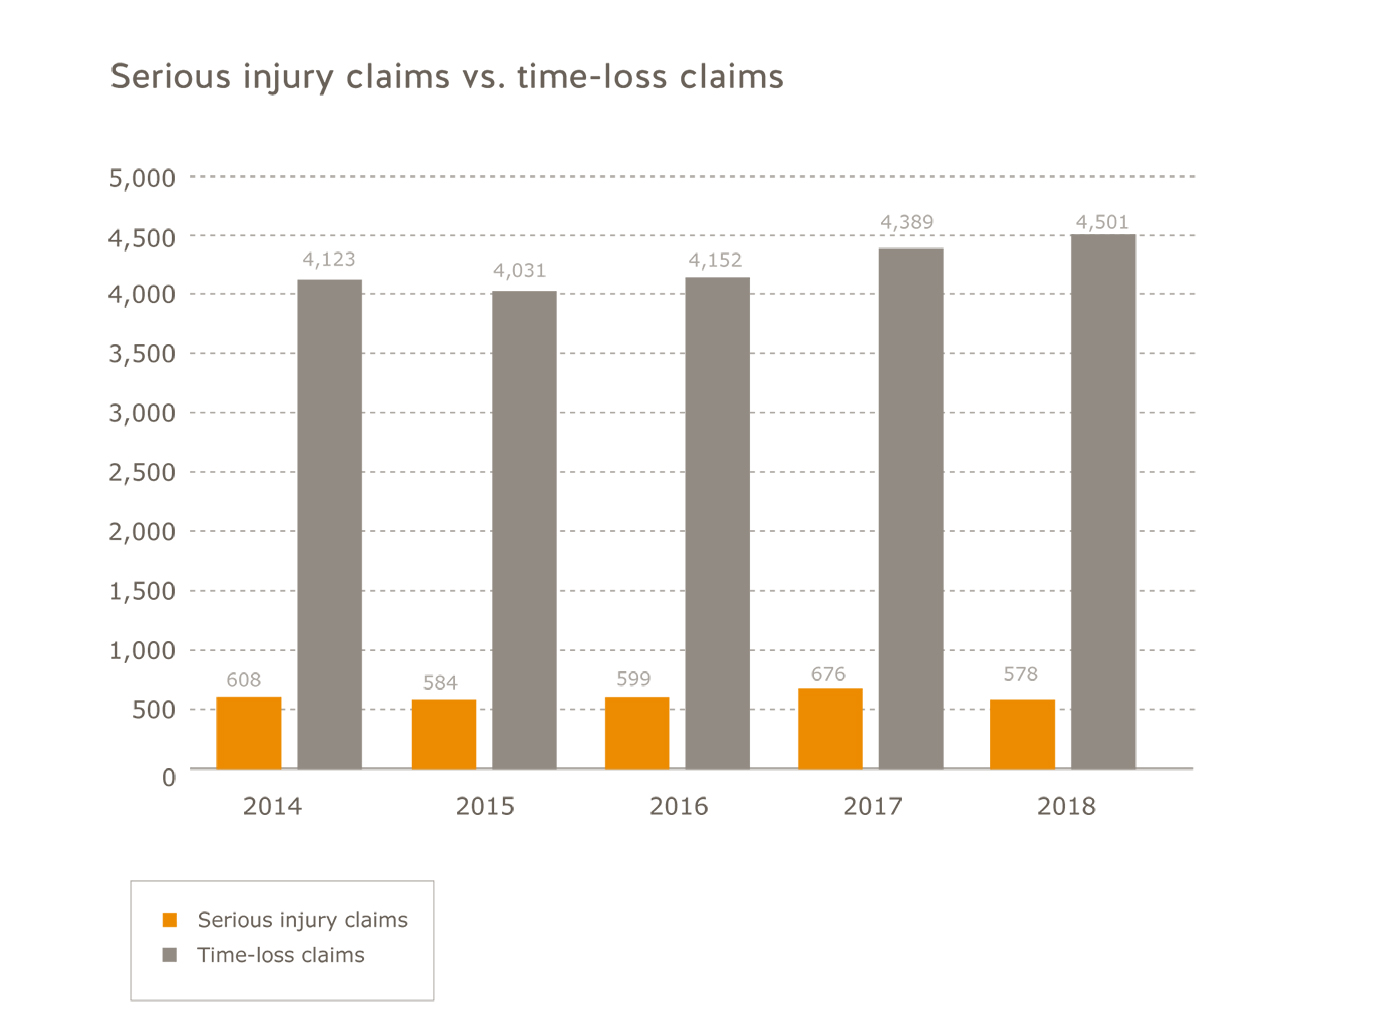 Transportation industry serious injury claims vs. time-loss claims for 2014 to 2018. Serious injury claims: 2014=608; 2015=584; 2016=599; 2017=676; 2018=578. Time-loss claims: 2014=4,123, 2015=4,031; 2016=4,152; 2017=4,389; 2018=4,501